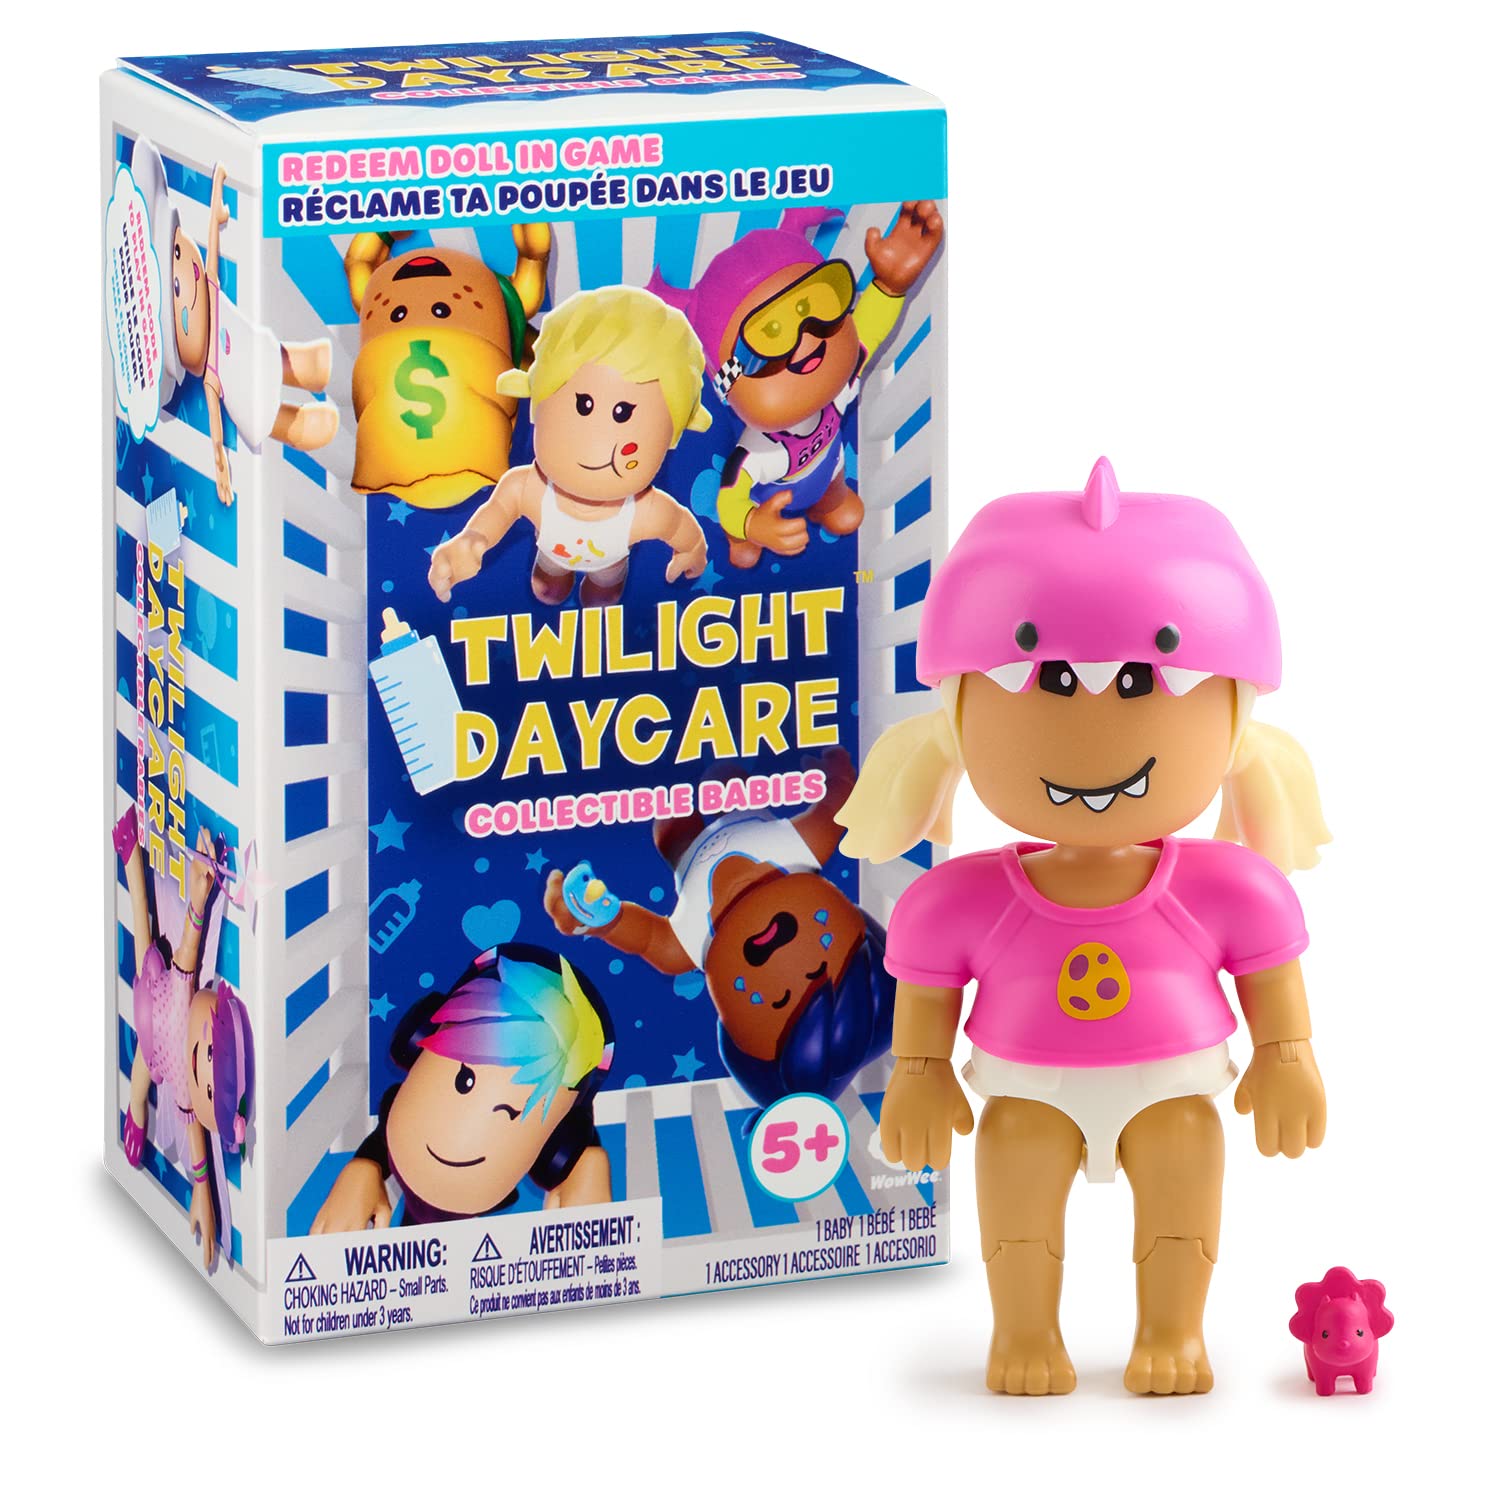 WowWee Twilight Daycare Collectible Baby Dolls w/ Virtual Item Codes for Roblox Game from $3.99 + Free Shipping w/ Prime or on $35+